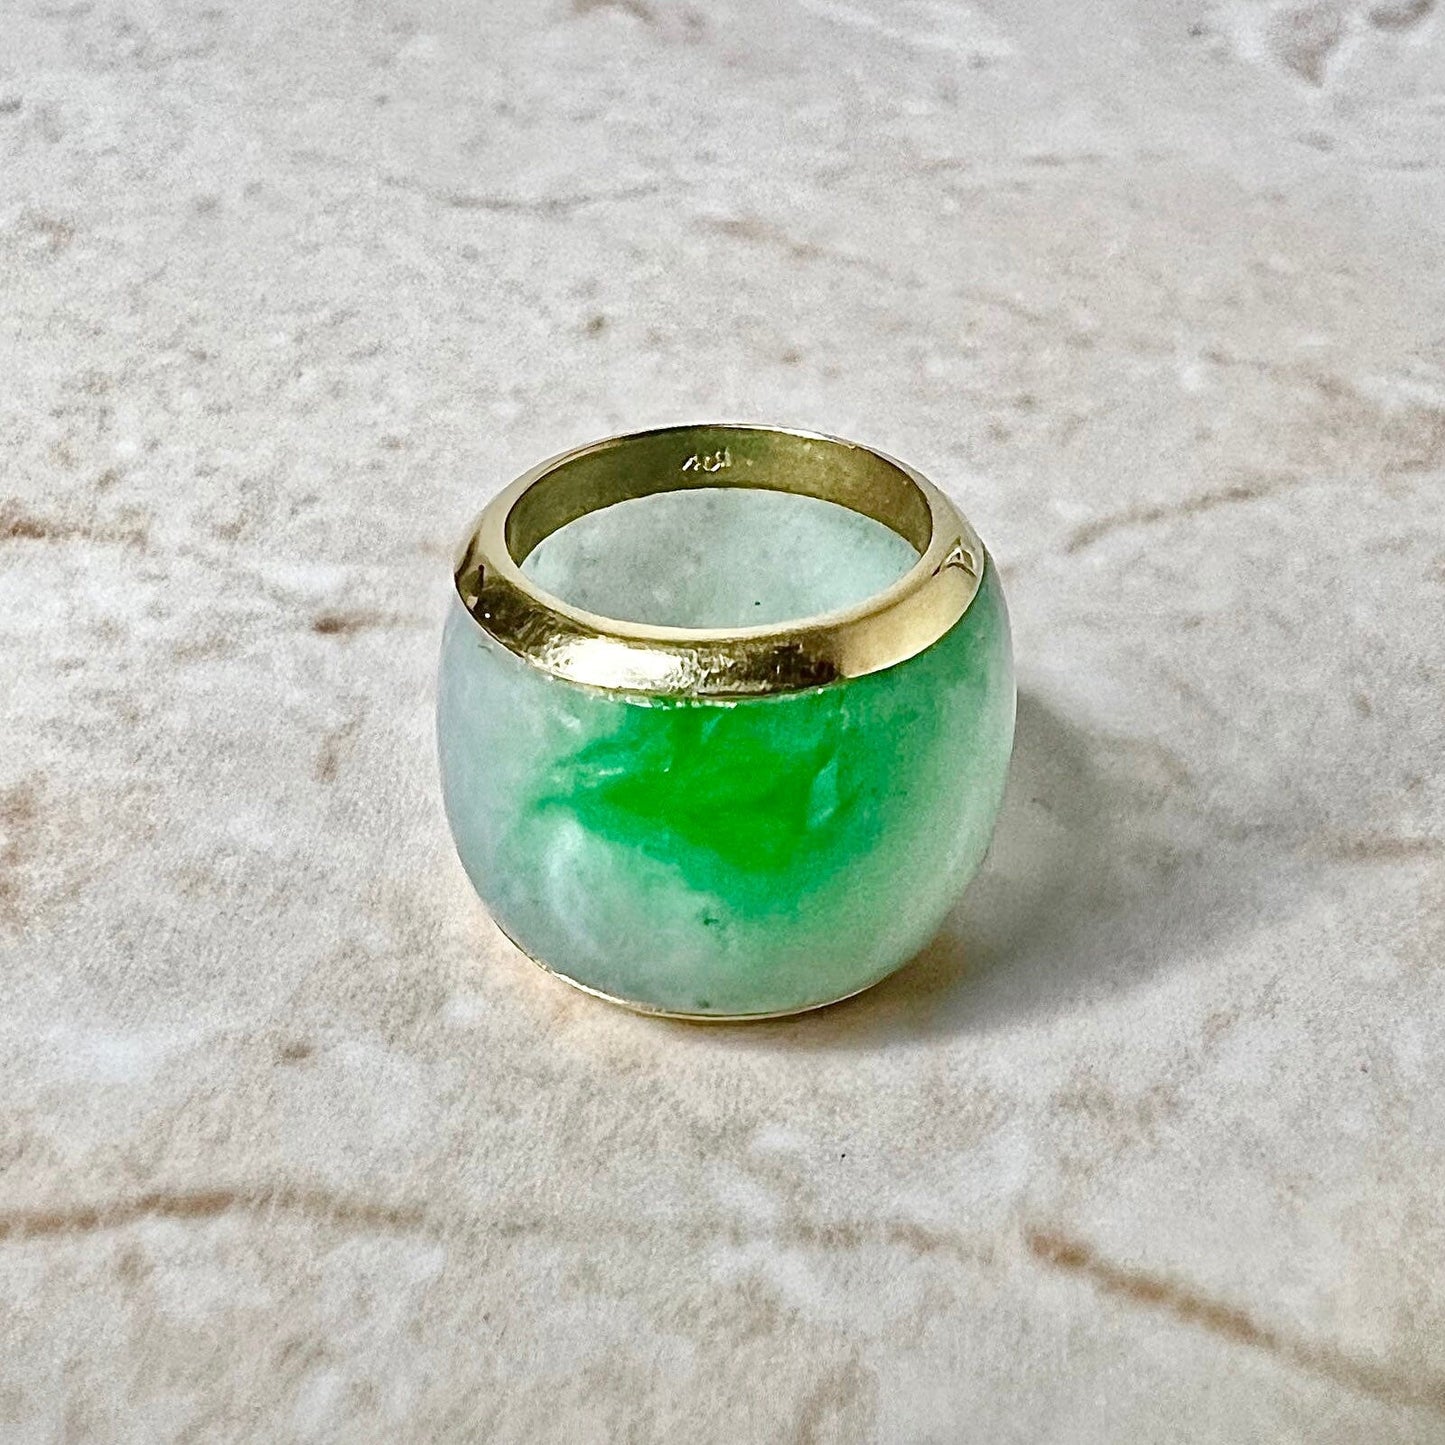 Vintage 18K A Type Green Jadeite Jade Barrel Slide Pendant Necklace - Yellow Gold Jadeite Pendant - Chinese Jewelry - Best Gift For Her